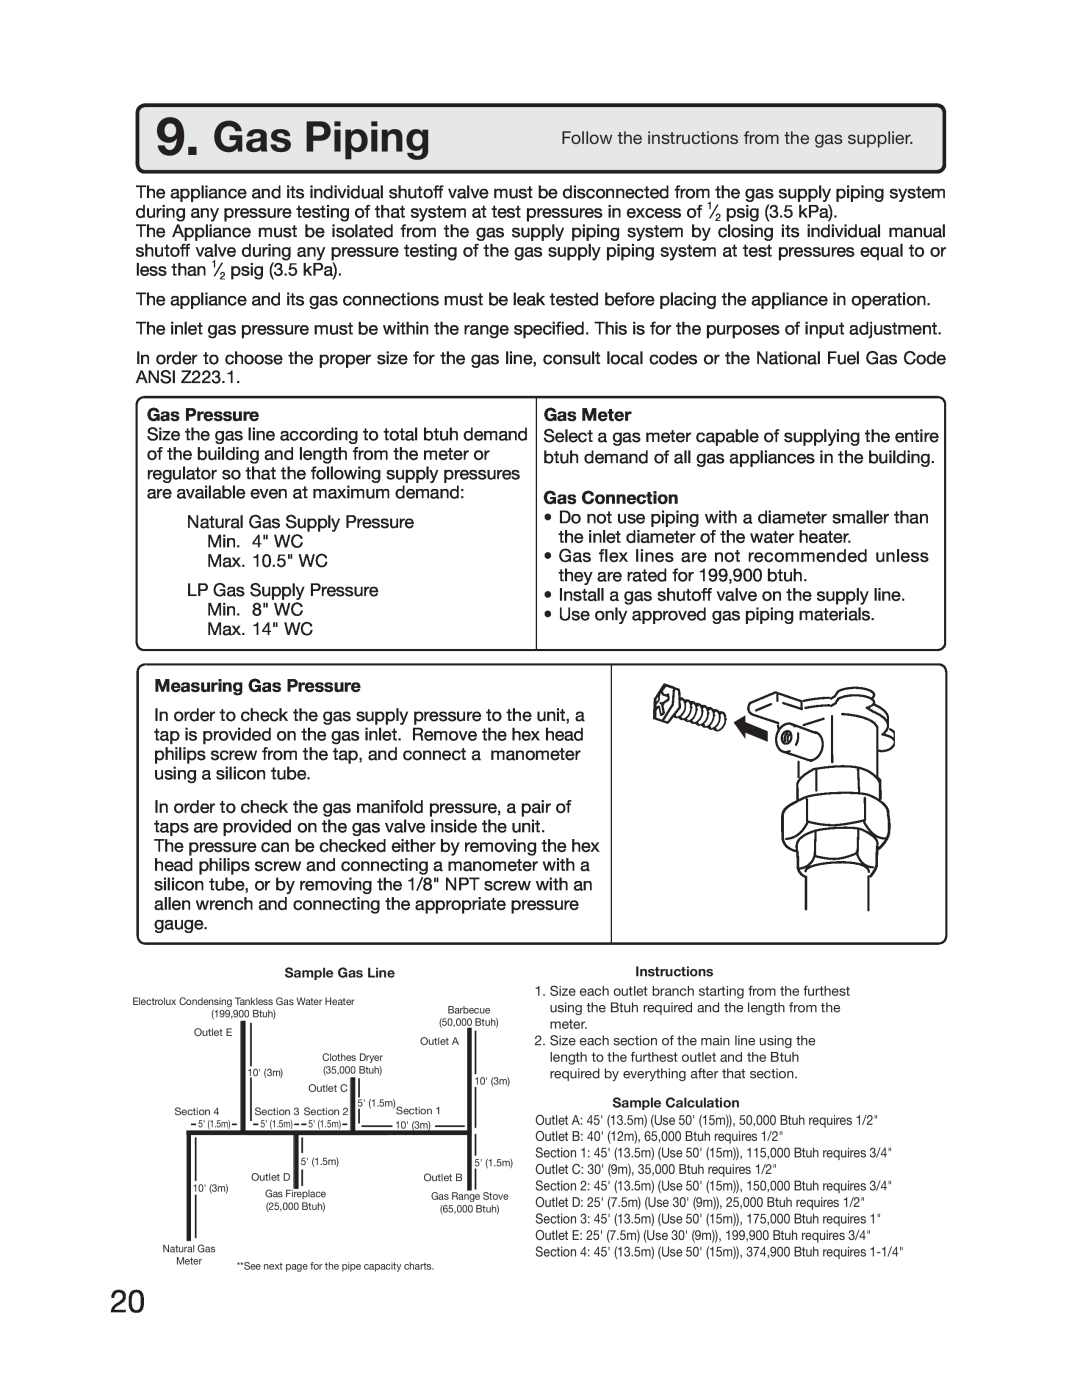 Electrolux 5995615357 installation manual Gas Piping, Measuring Gas Pressure, Gas Meter, Gas Connection 